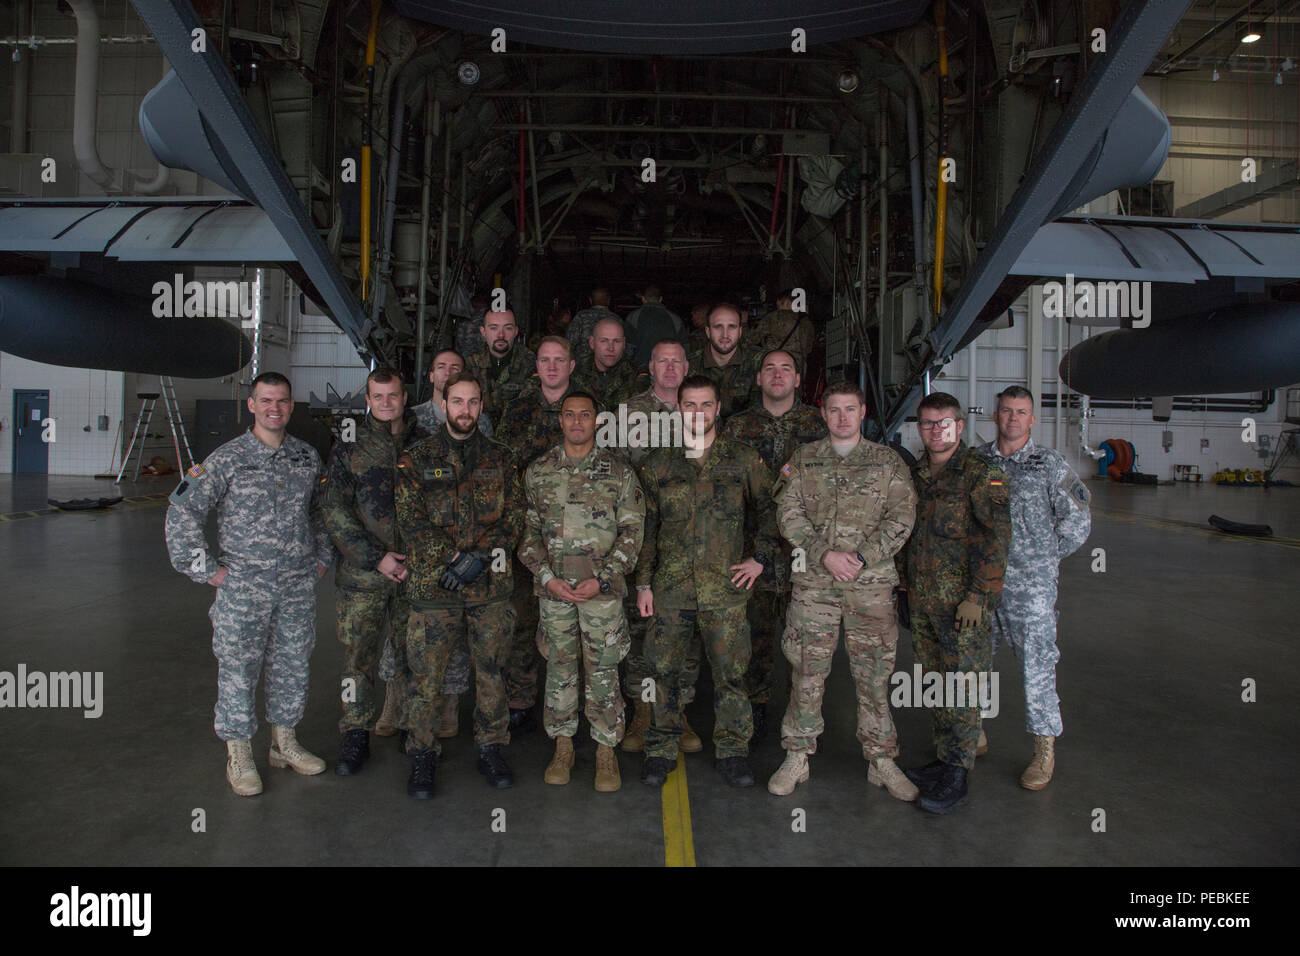 U.S. and German paratroopers pose for a photo after jumpmaster aircraft familiarization training aboard a C-130 Hercules in support of Operation Toy Drop at Simmons Army Air Field, Cumberland County, N.C., Dec. 1, 2015. Operation Toy Drop combines U.S. Army Reserve personnel, Army paratroopers, dozens of volunteers and partner nation military personnel, more than a dozen Air Force aircraft and toys, all for what has become the world’s largest combined airborne operation. (U.S. Army photo by Spc. Tracy McKithern/Released) Stock Photo